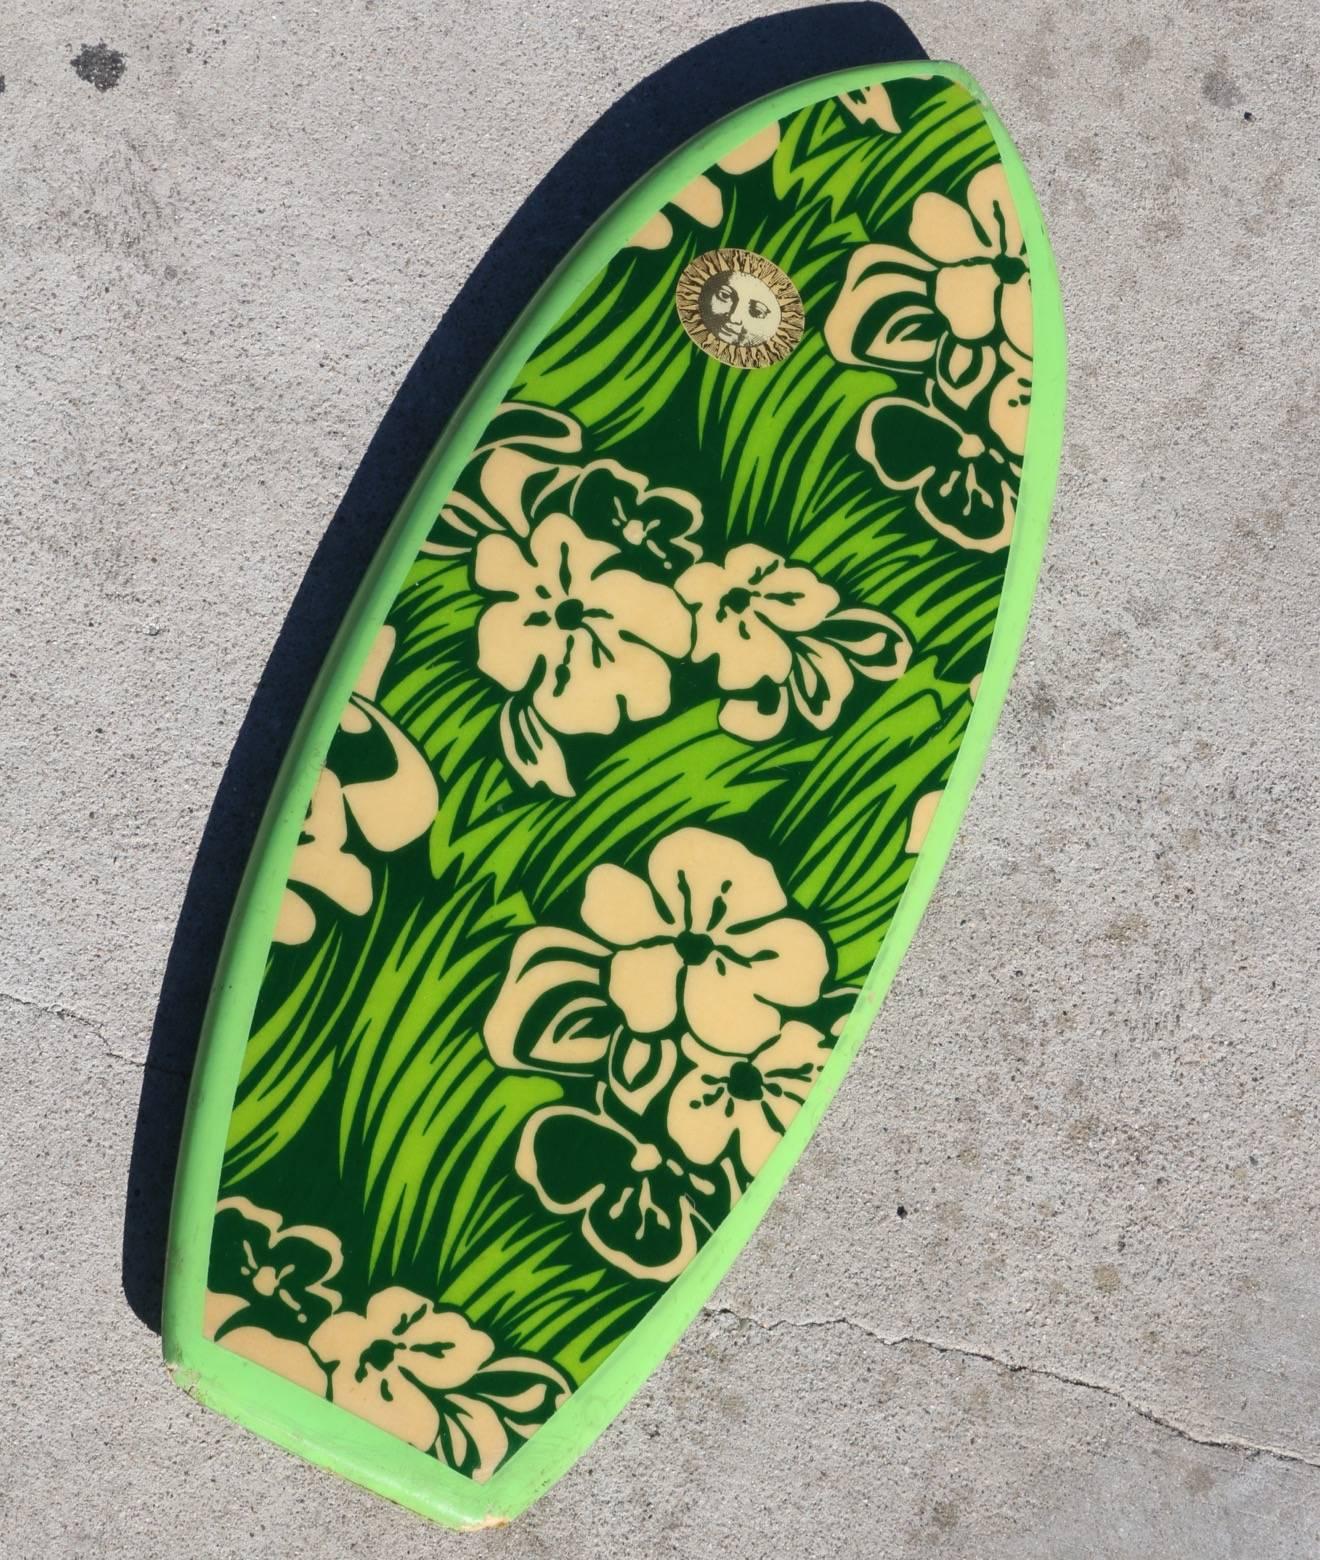 This all original 1965 Dextra Bellyboard practically explodes with vibrant shades of spring green. Graphic flowers and leaves adorn the deck and are accented by a solid green bottom. A wonderful slice of vintage California surf lifestyle and a